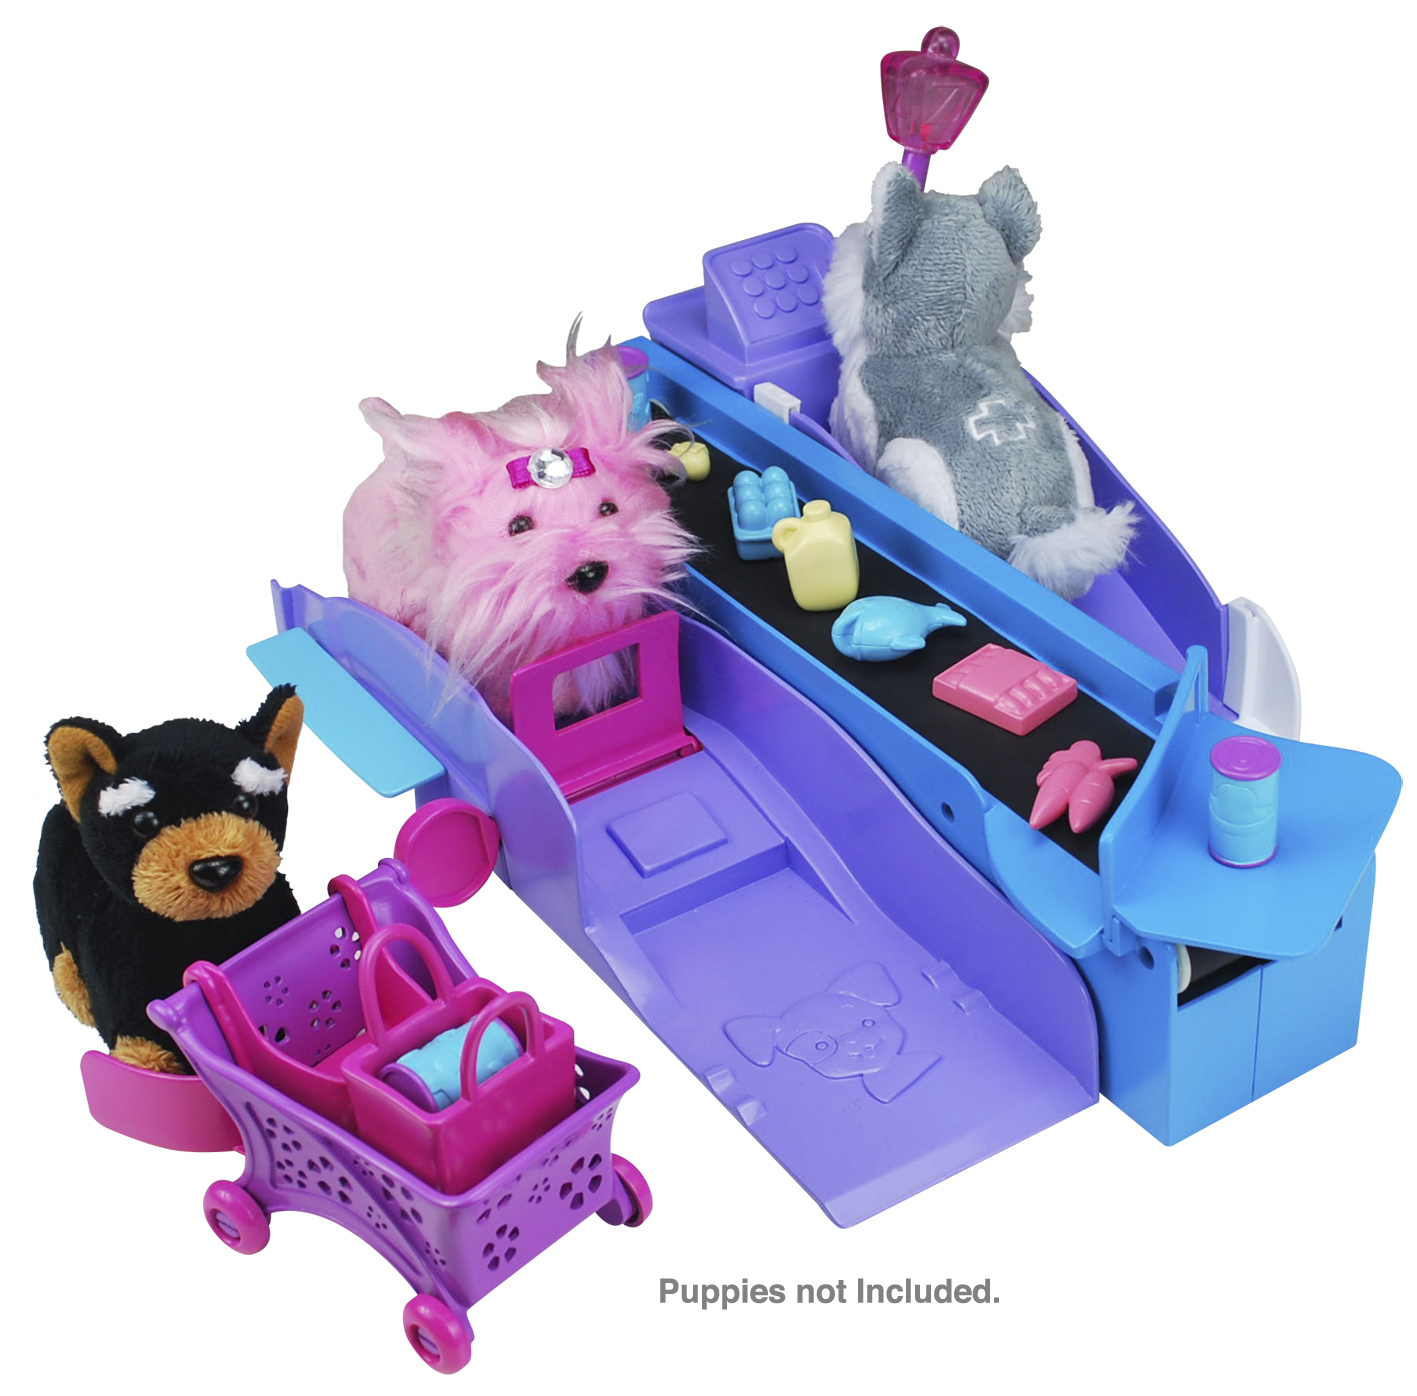 Puppies - Grocery Store Playset